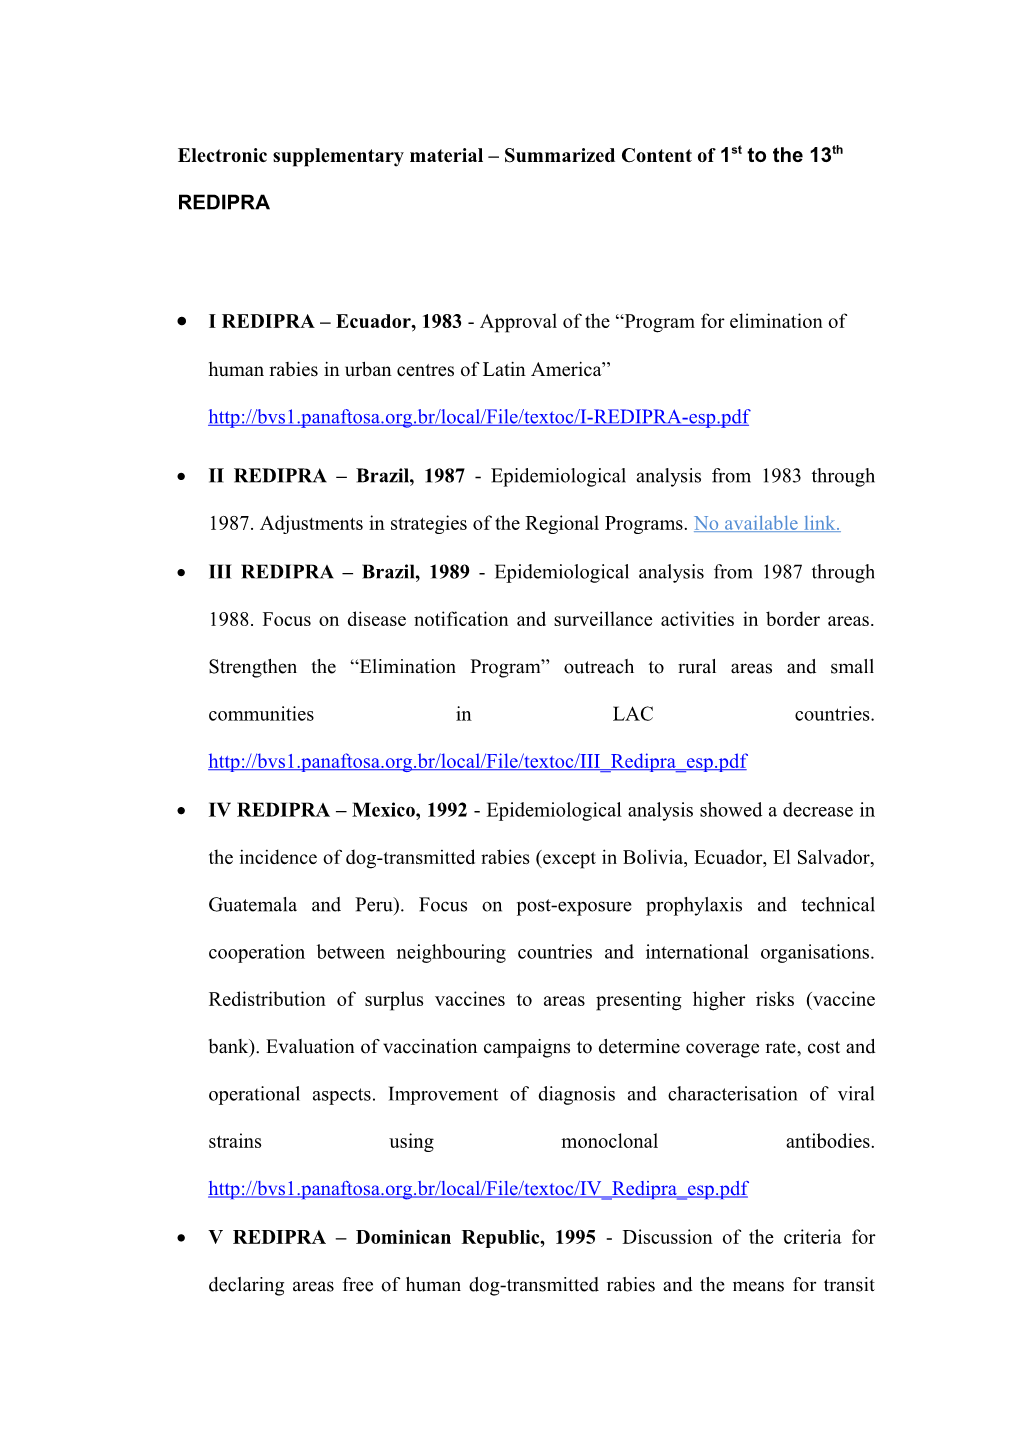 Electronic Supplementary Material Summarized Content of 1St to the 13Th REDIPRA